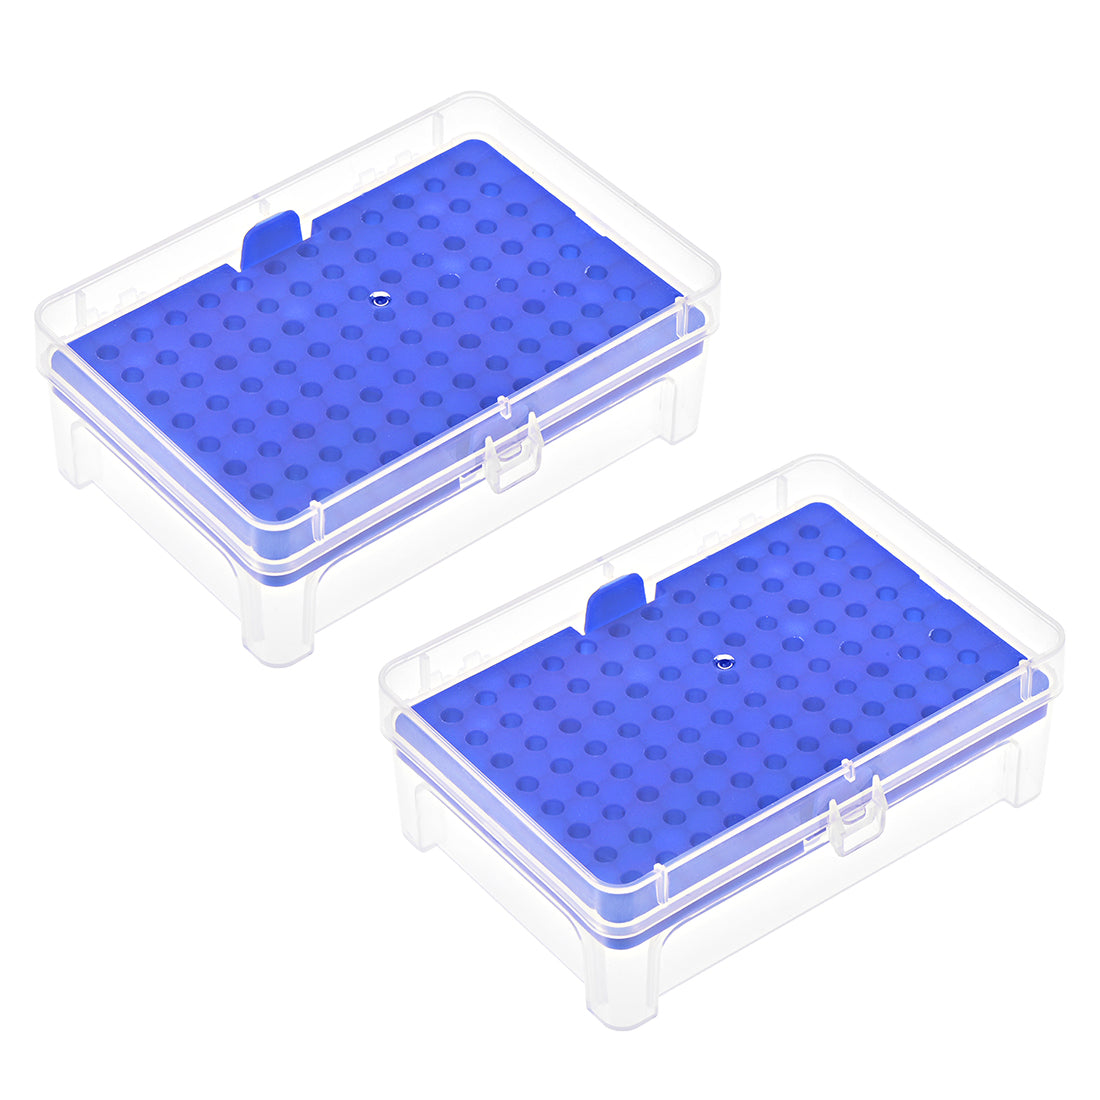 uxcell Uxcell Pipette Tips Box 96-Well Polypropylene Tip Holder Container for 10ul Pipettor 4.5mm Hole Diameter Blue 2Pcs